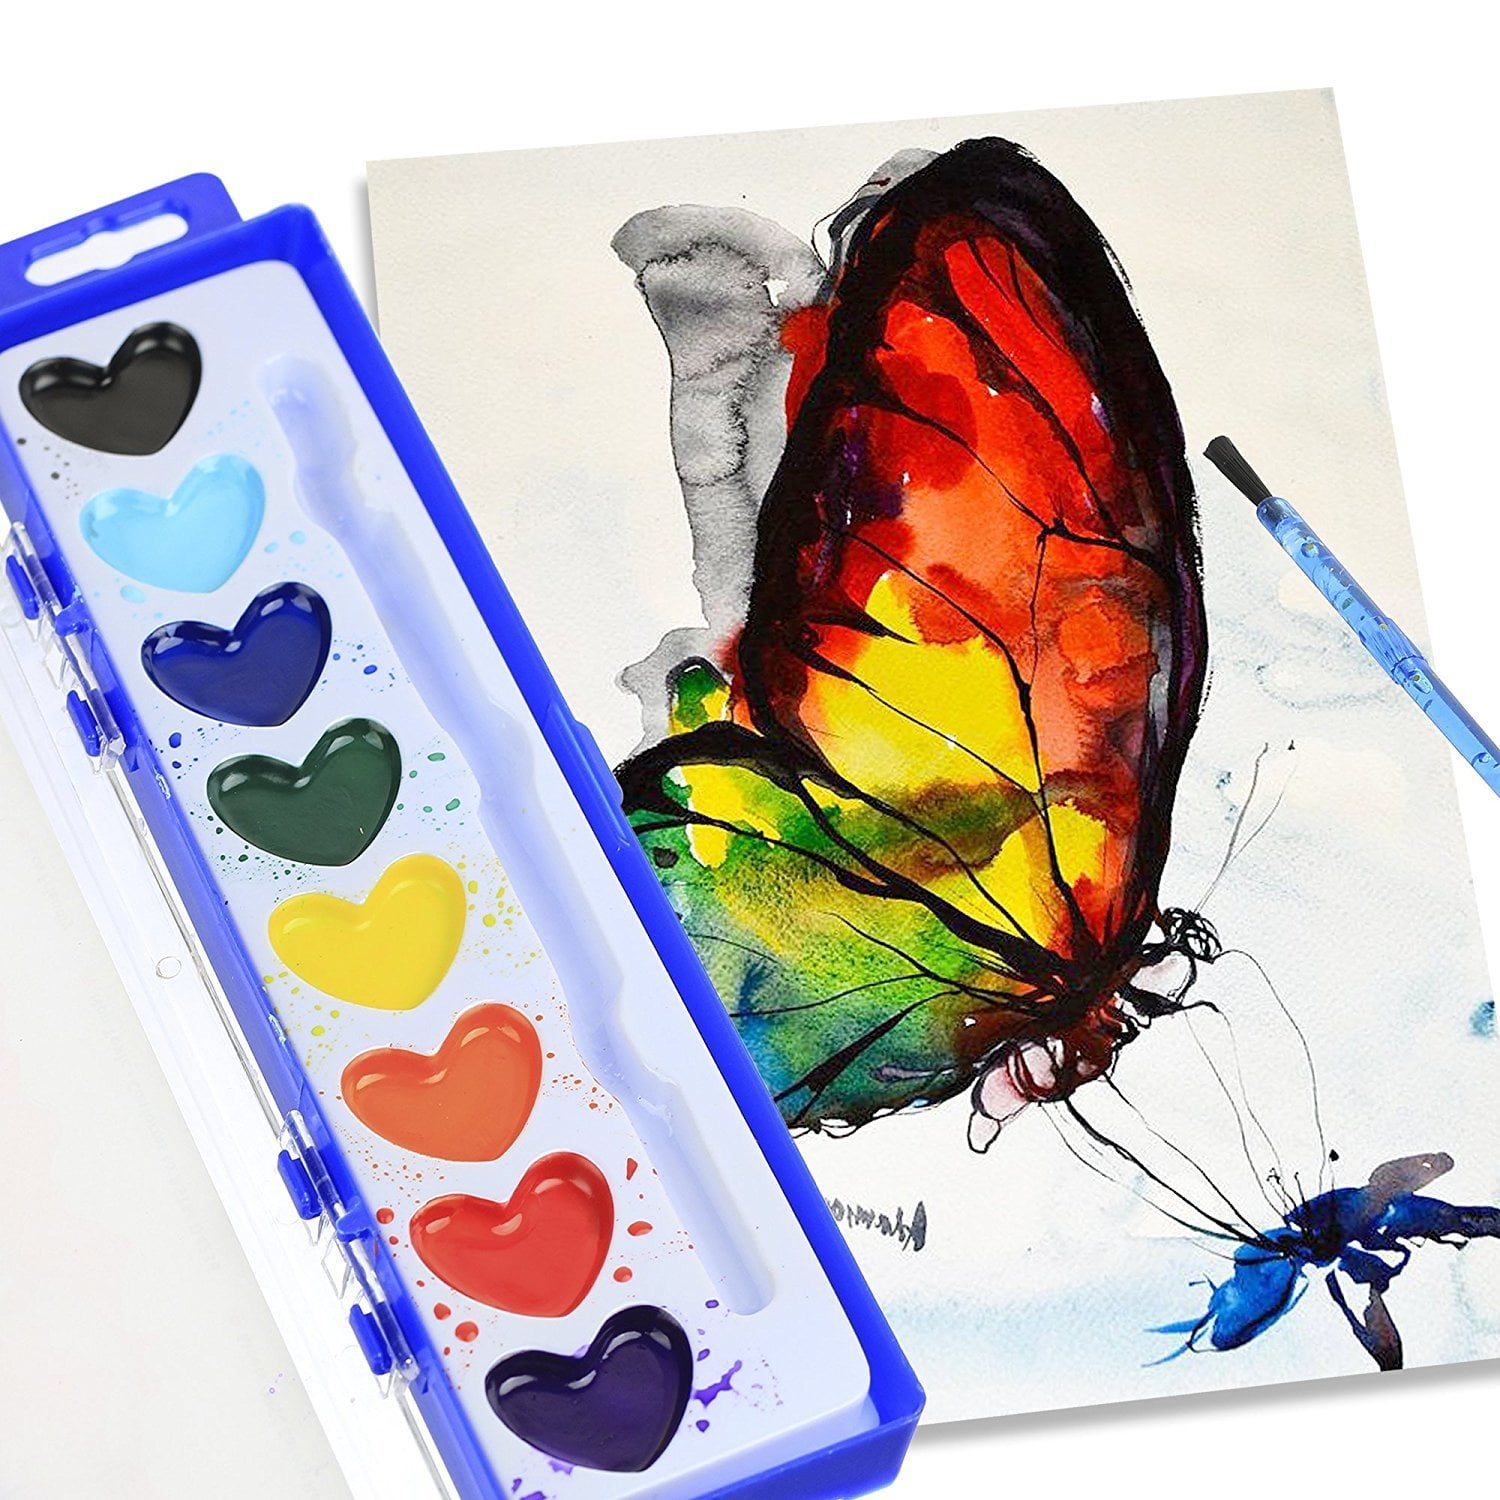 38 Water Color Paints Jumbo Pack - Heart Shaped